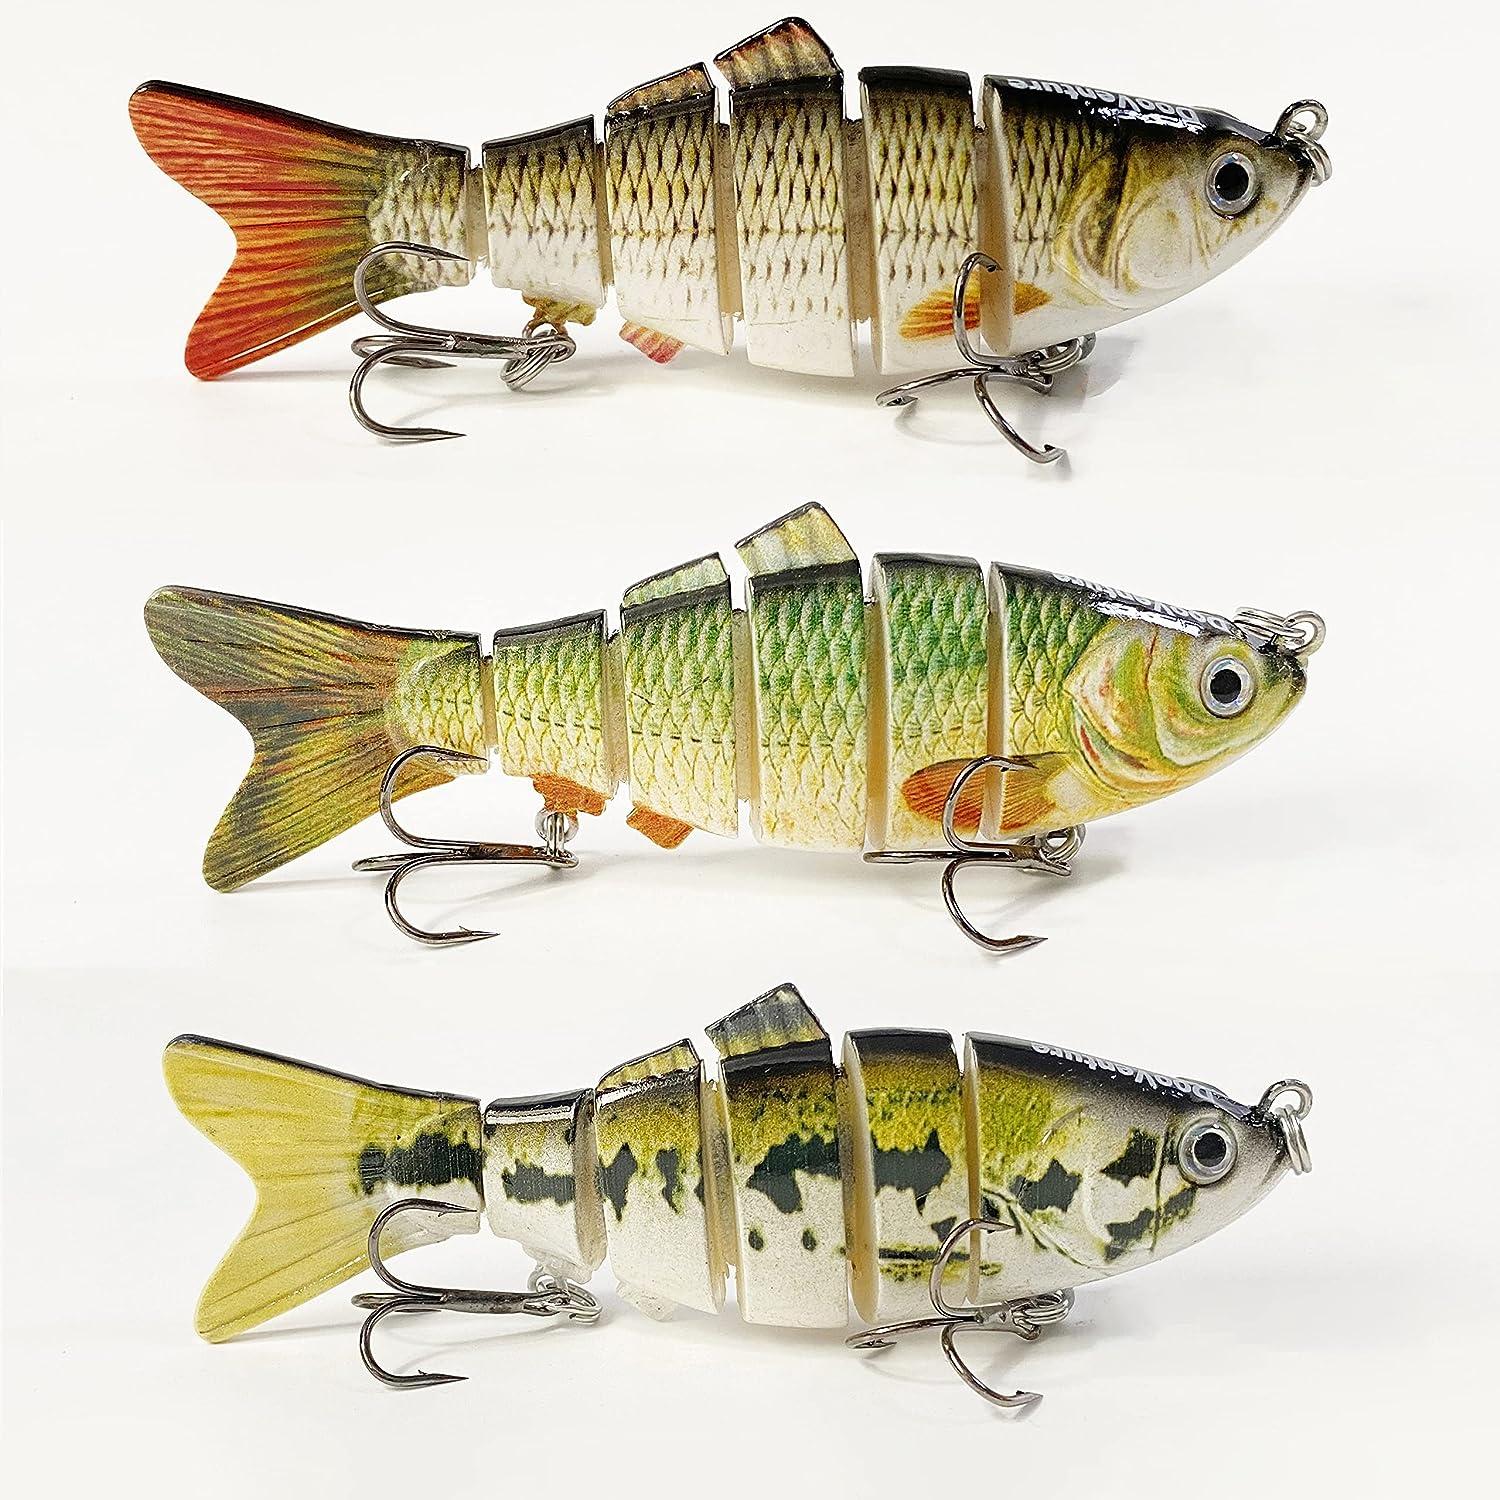 Buy TRUSCEND Fishing Lures for Freshwater and Saltwater, Lifelike